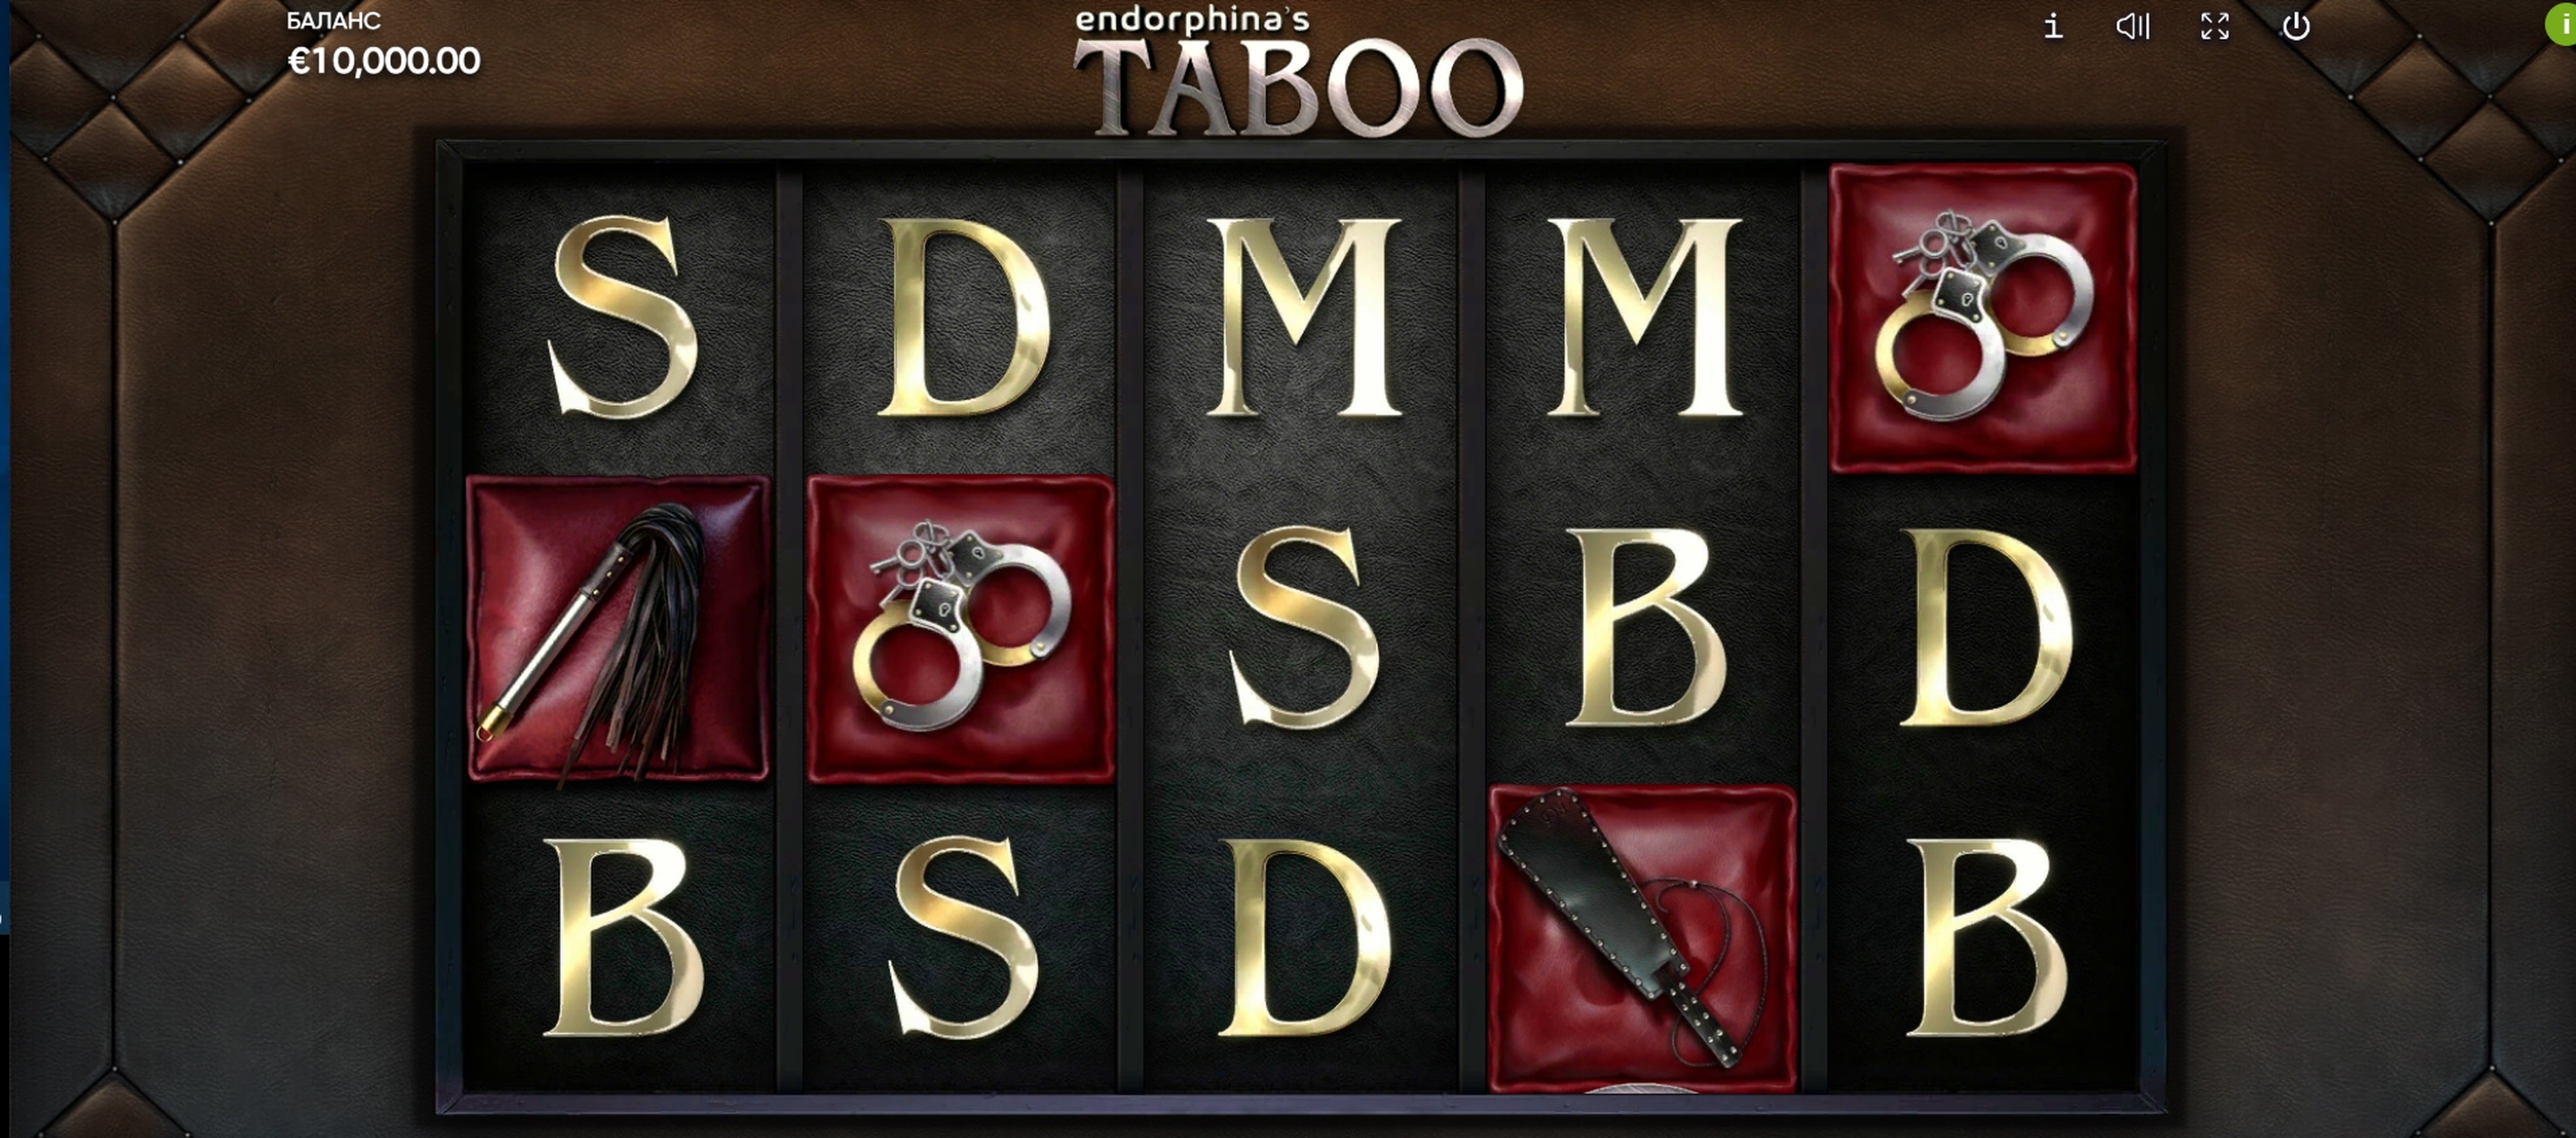 Reels in Taboo Slot Game by Endorphina